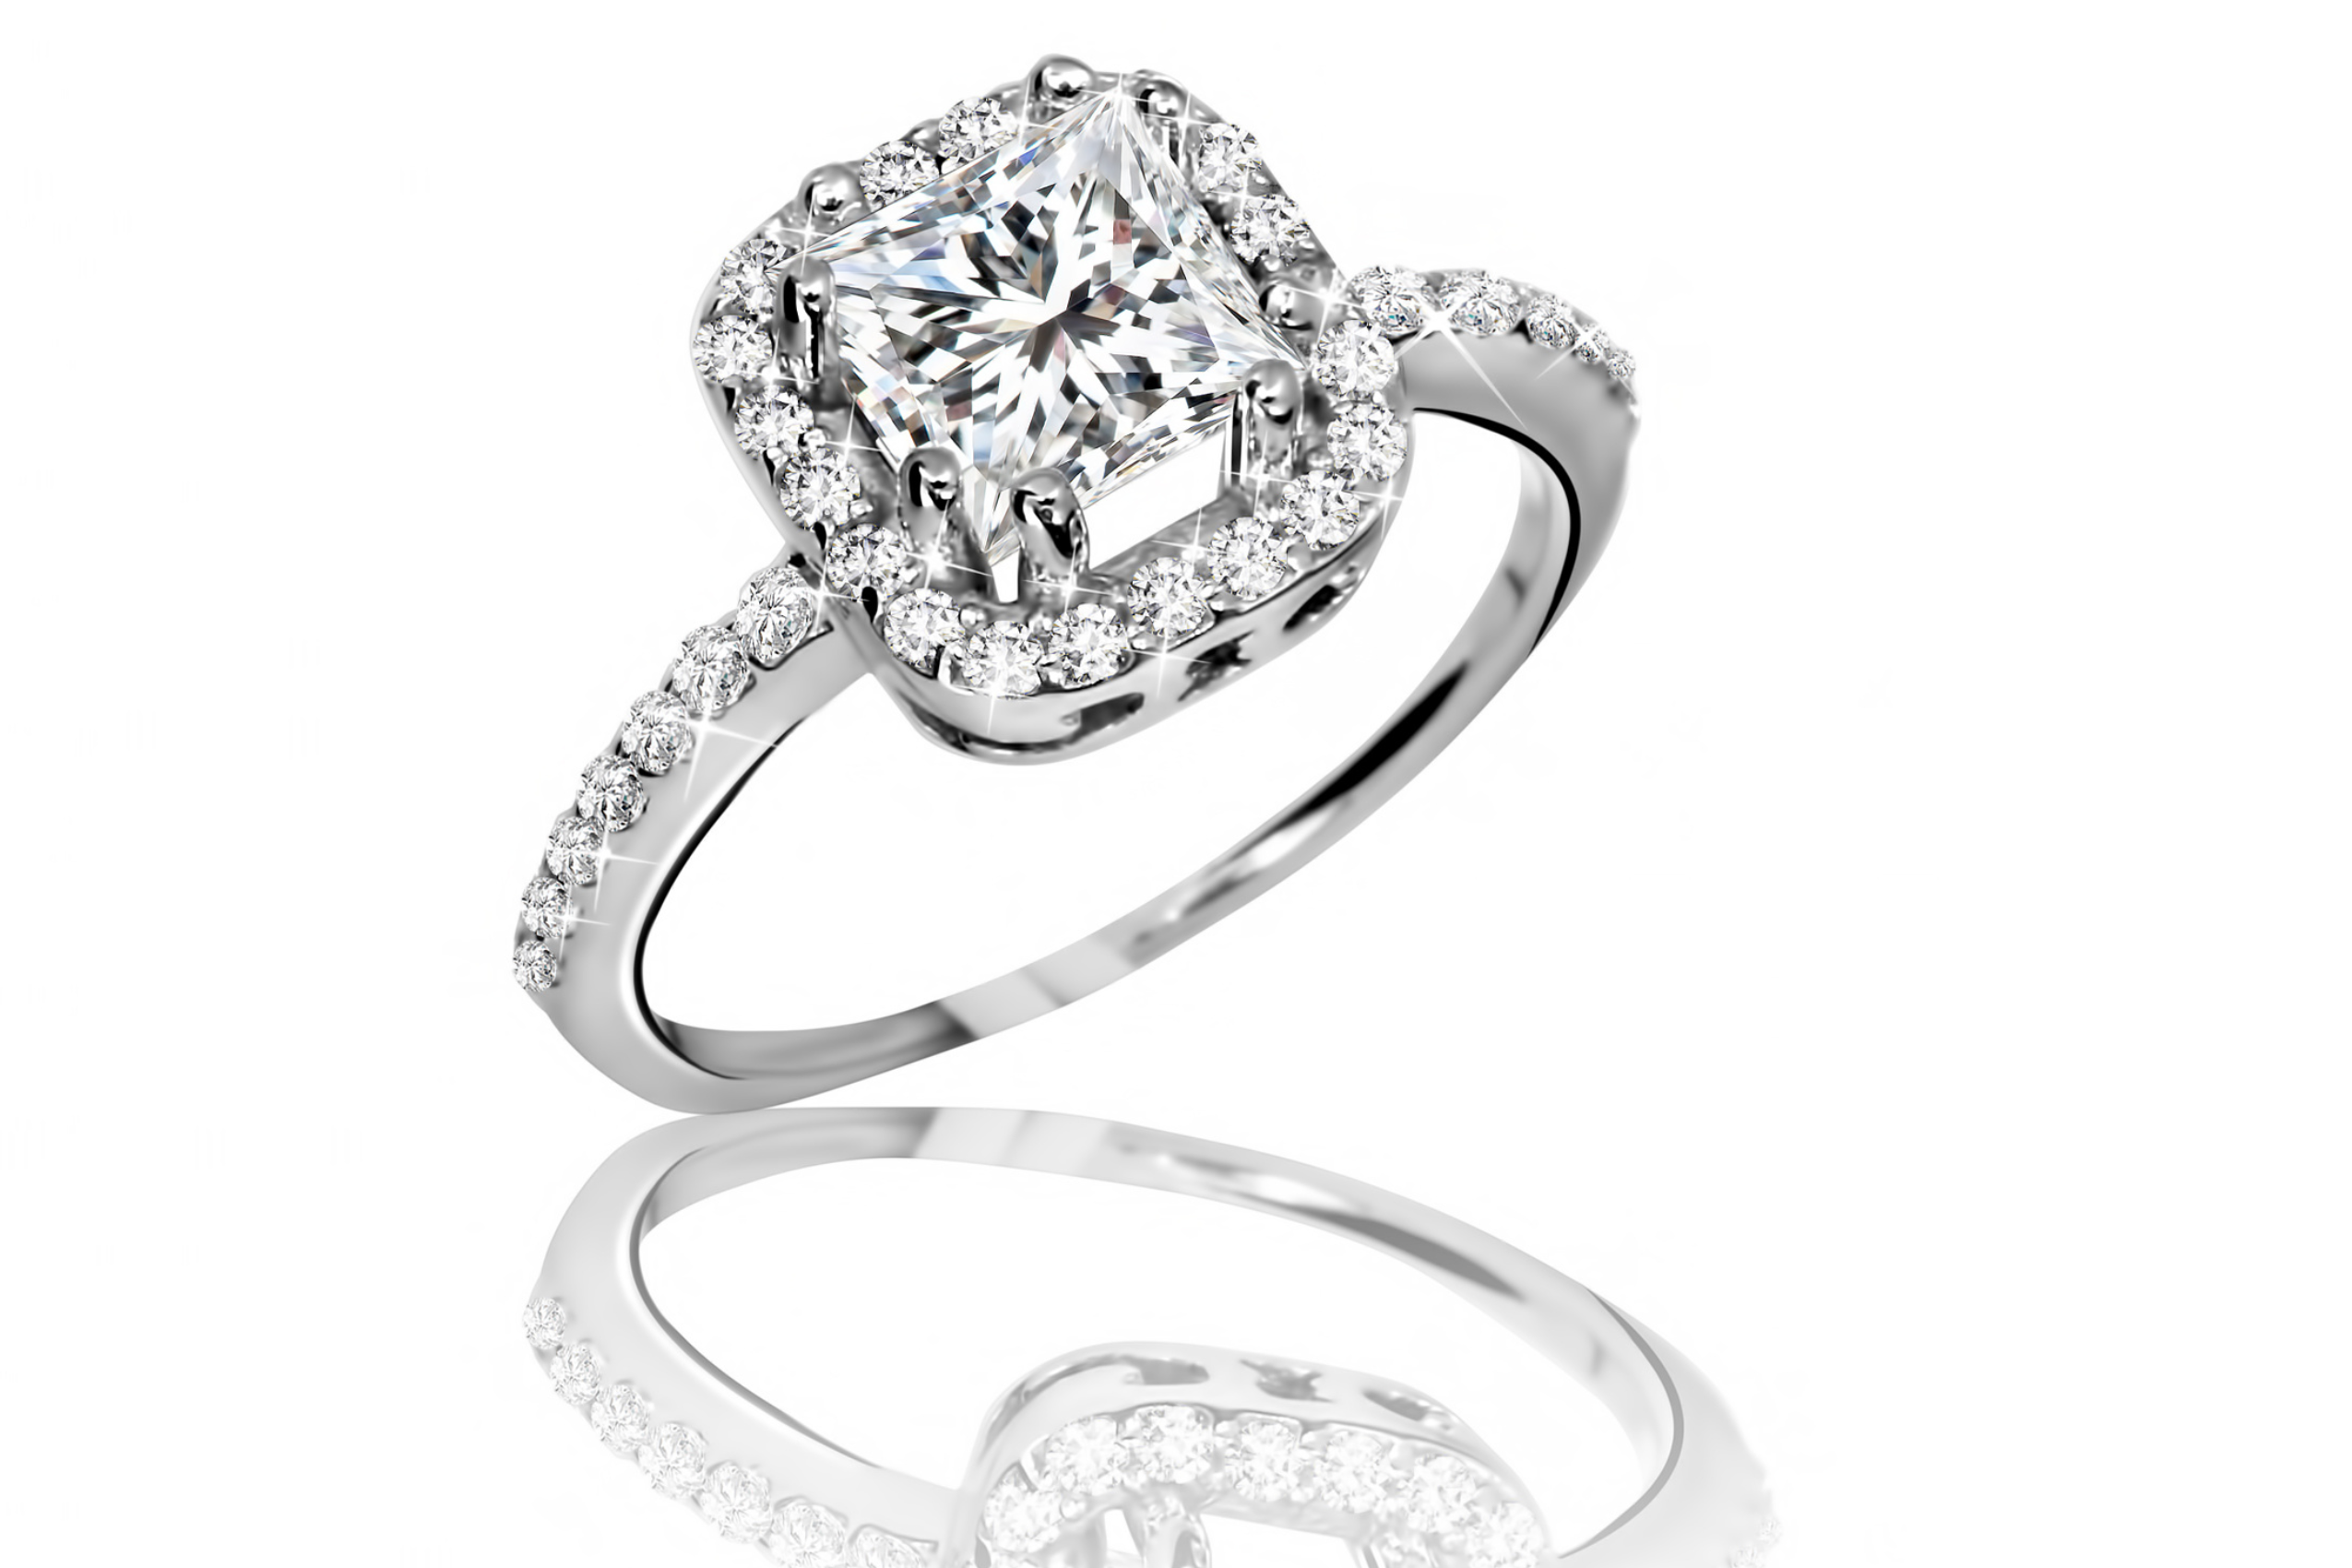 A bridal ring engagement ring with a square cut center diamond, surrounded by a square of smaller diamonds. The white gold band is inlaid with smaller diamonds. 